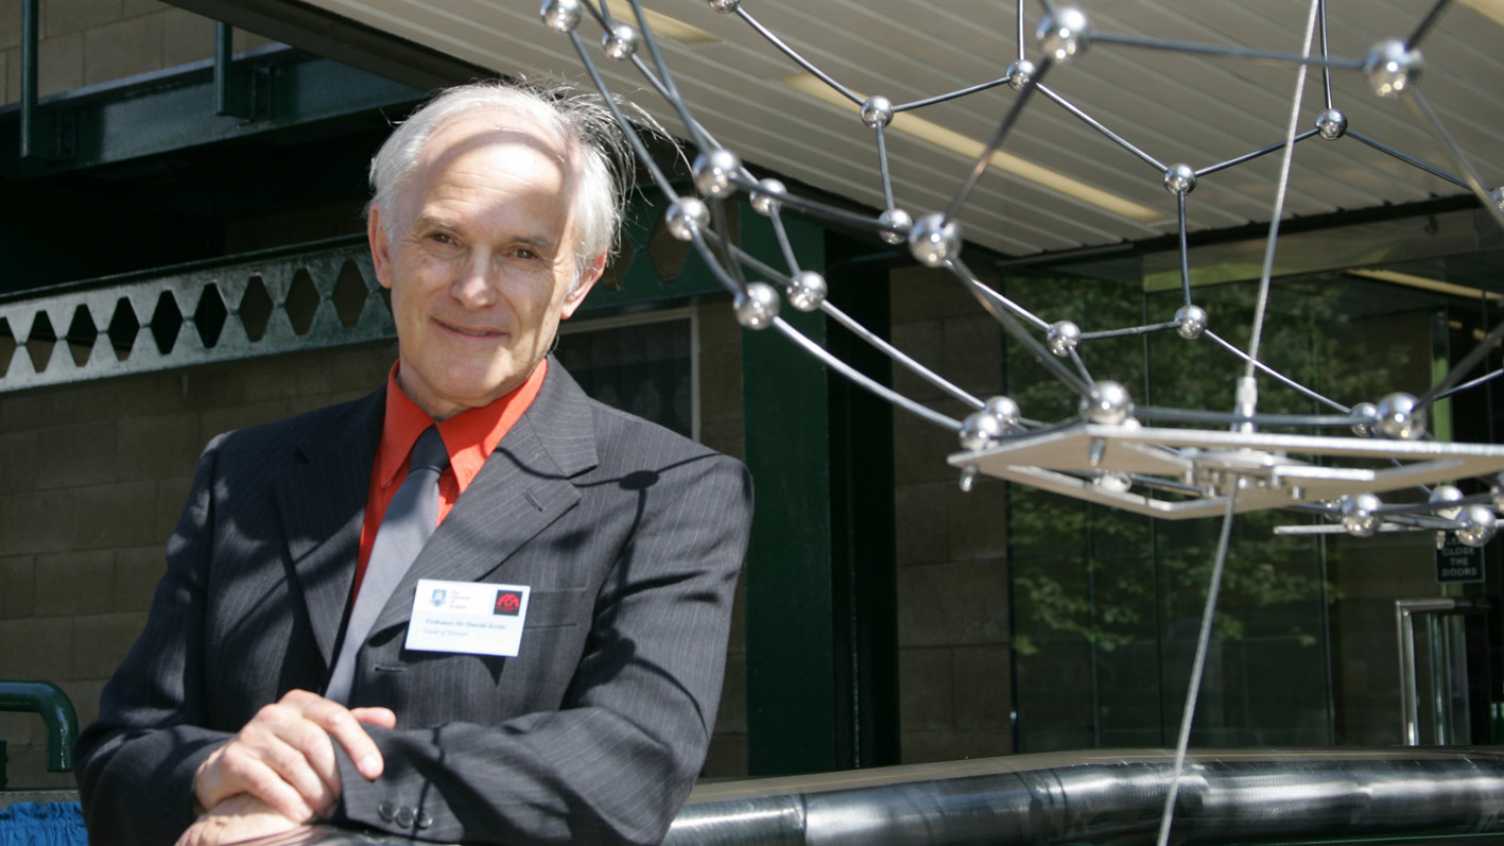 Thumbnail for Professor Sir Harry Kroto, FRS 1939-2016 | Kroto Research Institute